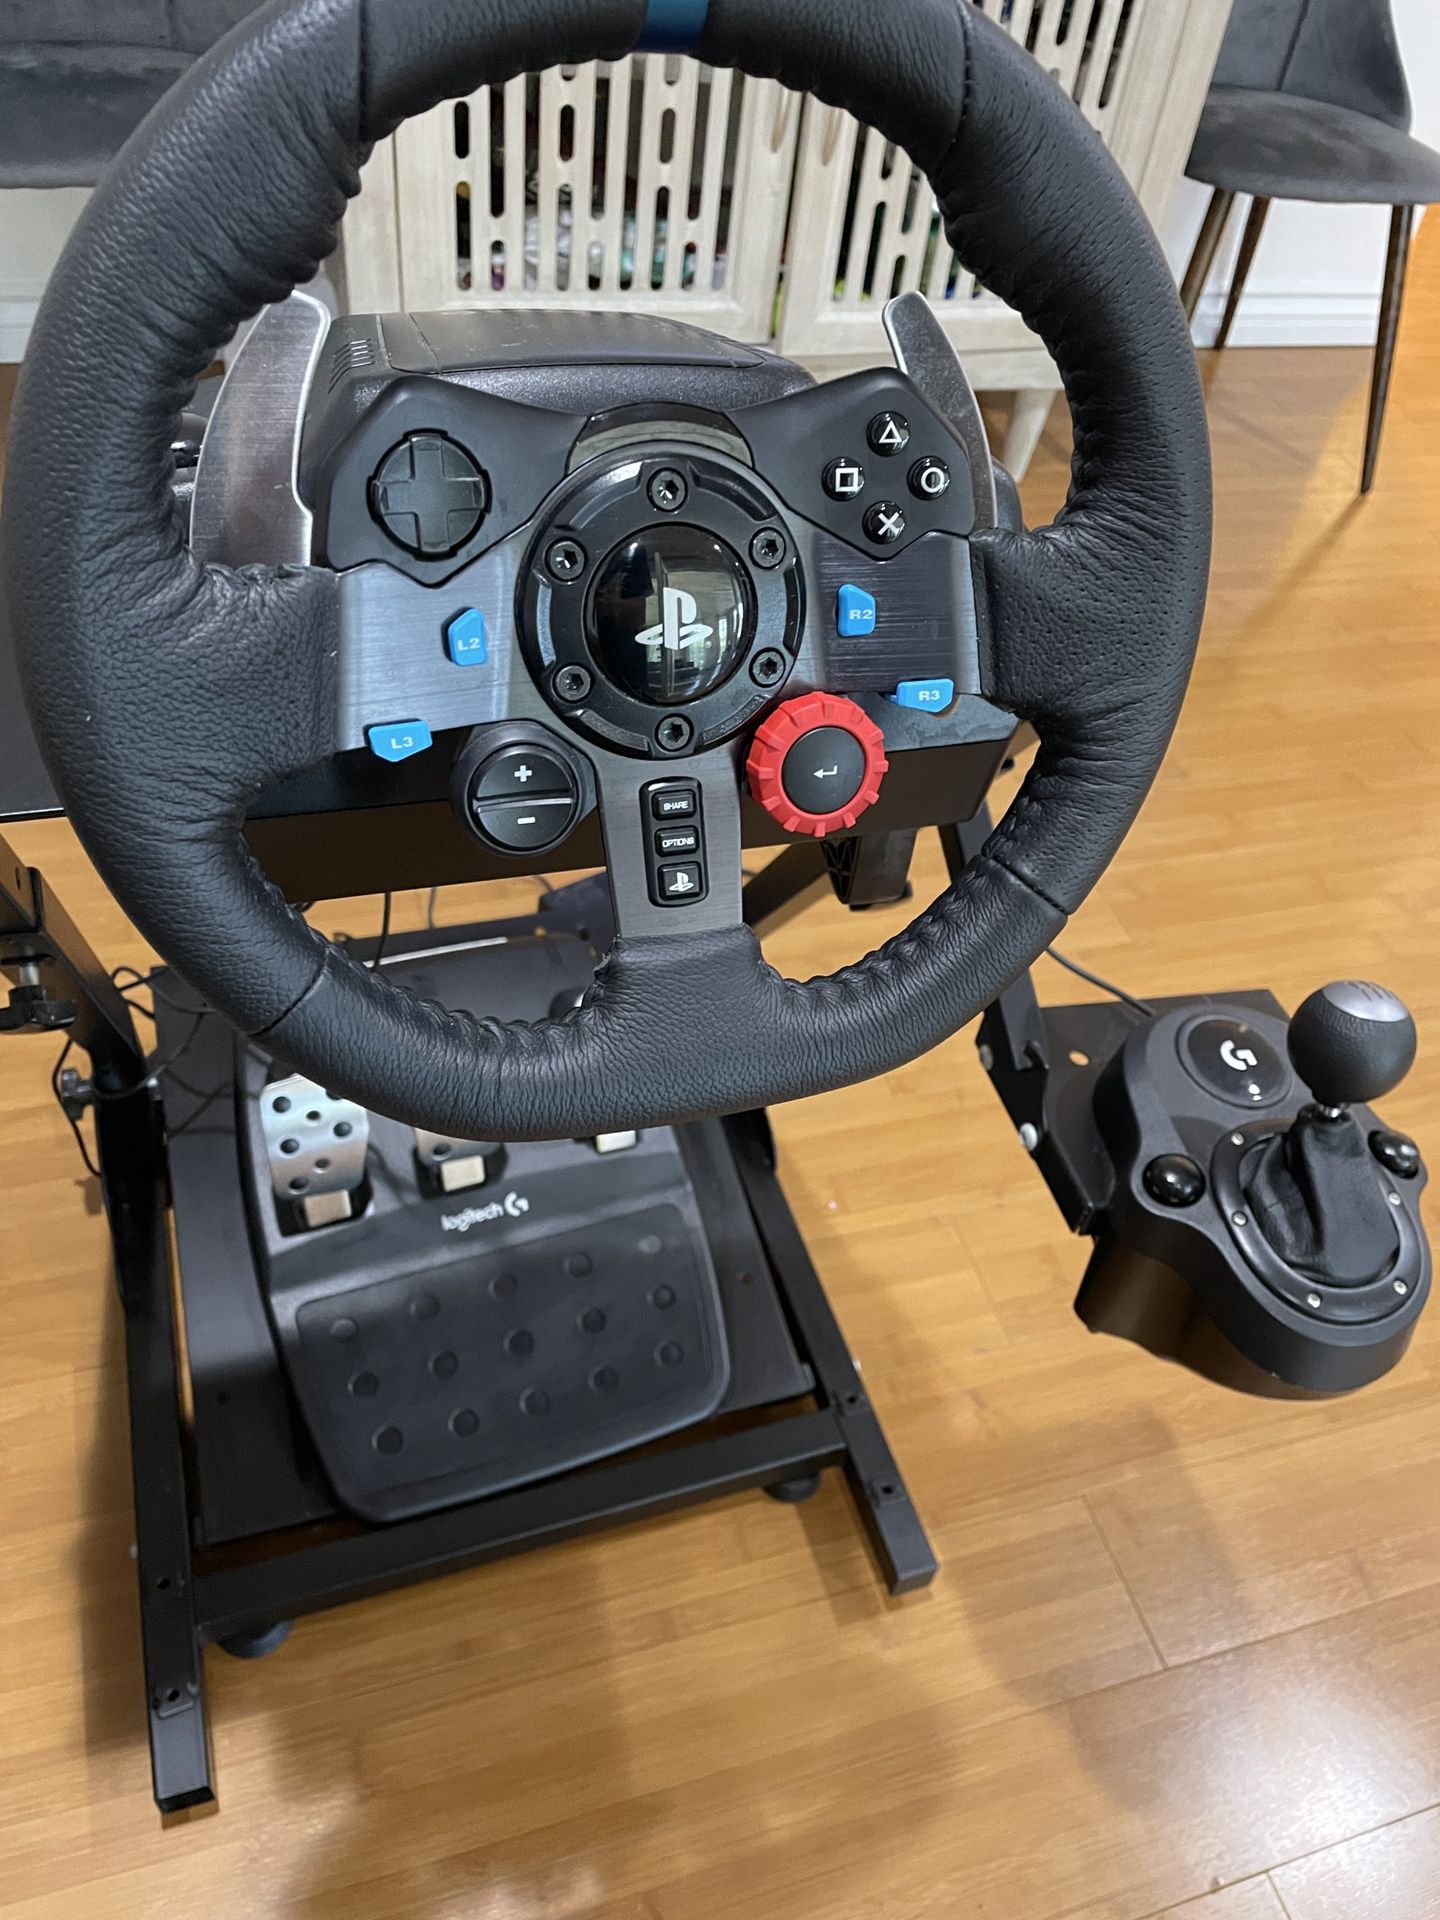 Logitech Driving Force Pro Feedback Steering Wheel Pedals E-UJ11 PC PS2 PS3  900 degrees for Sale in Arlington, TX - OfferUp